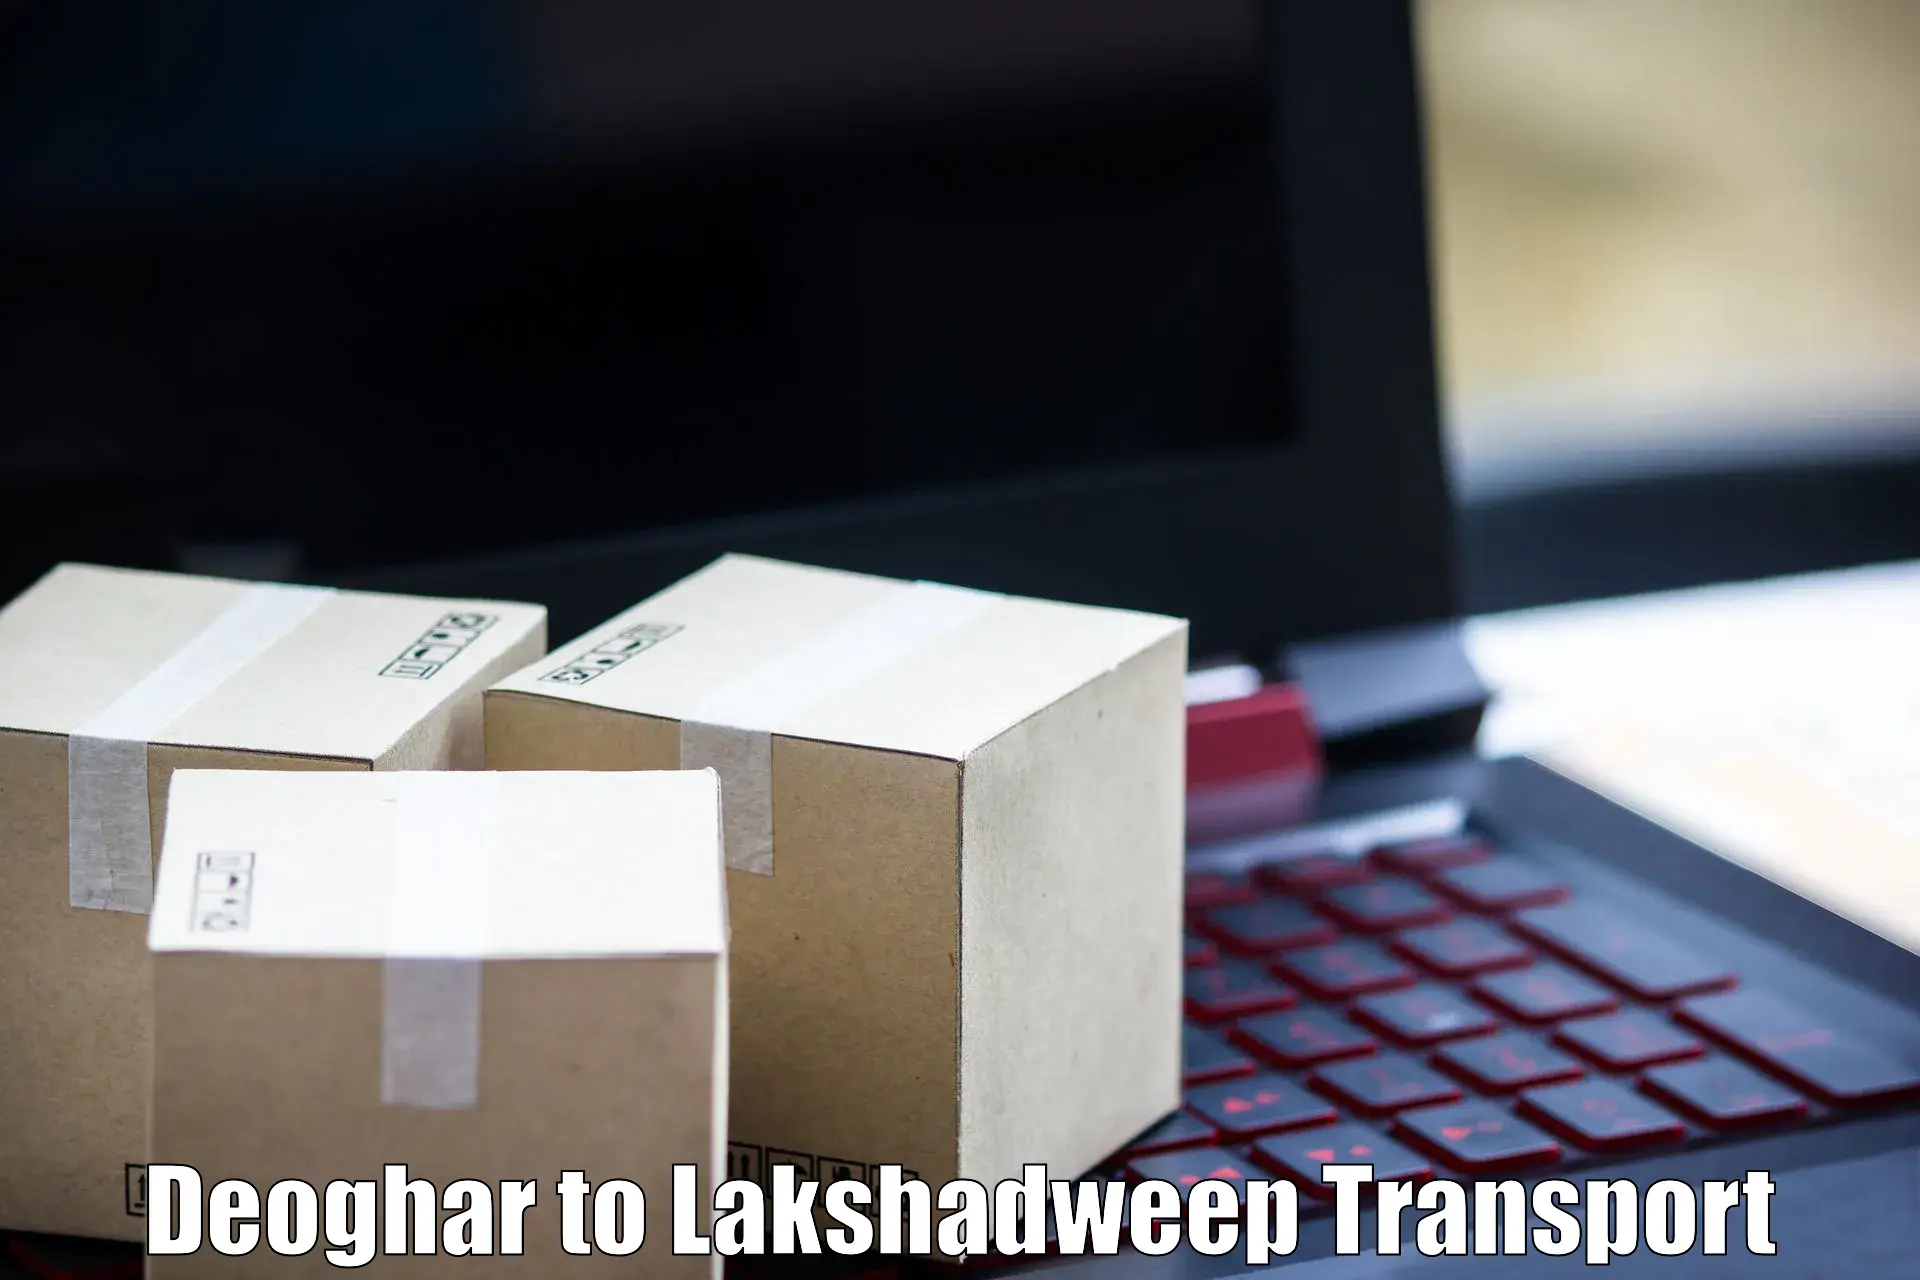 Transport shared services Deoghar to Lakshadweep